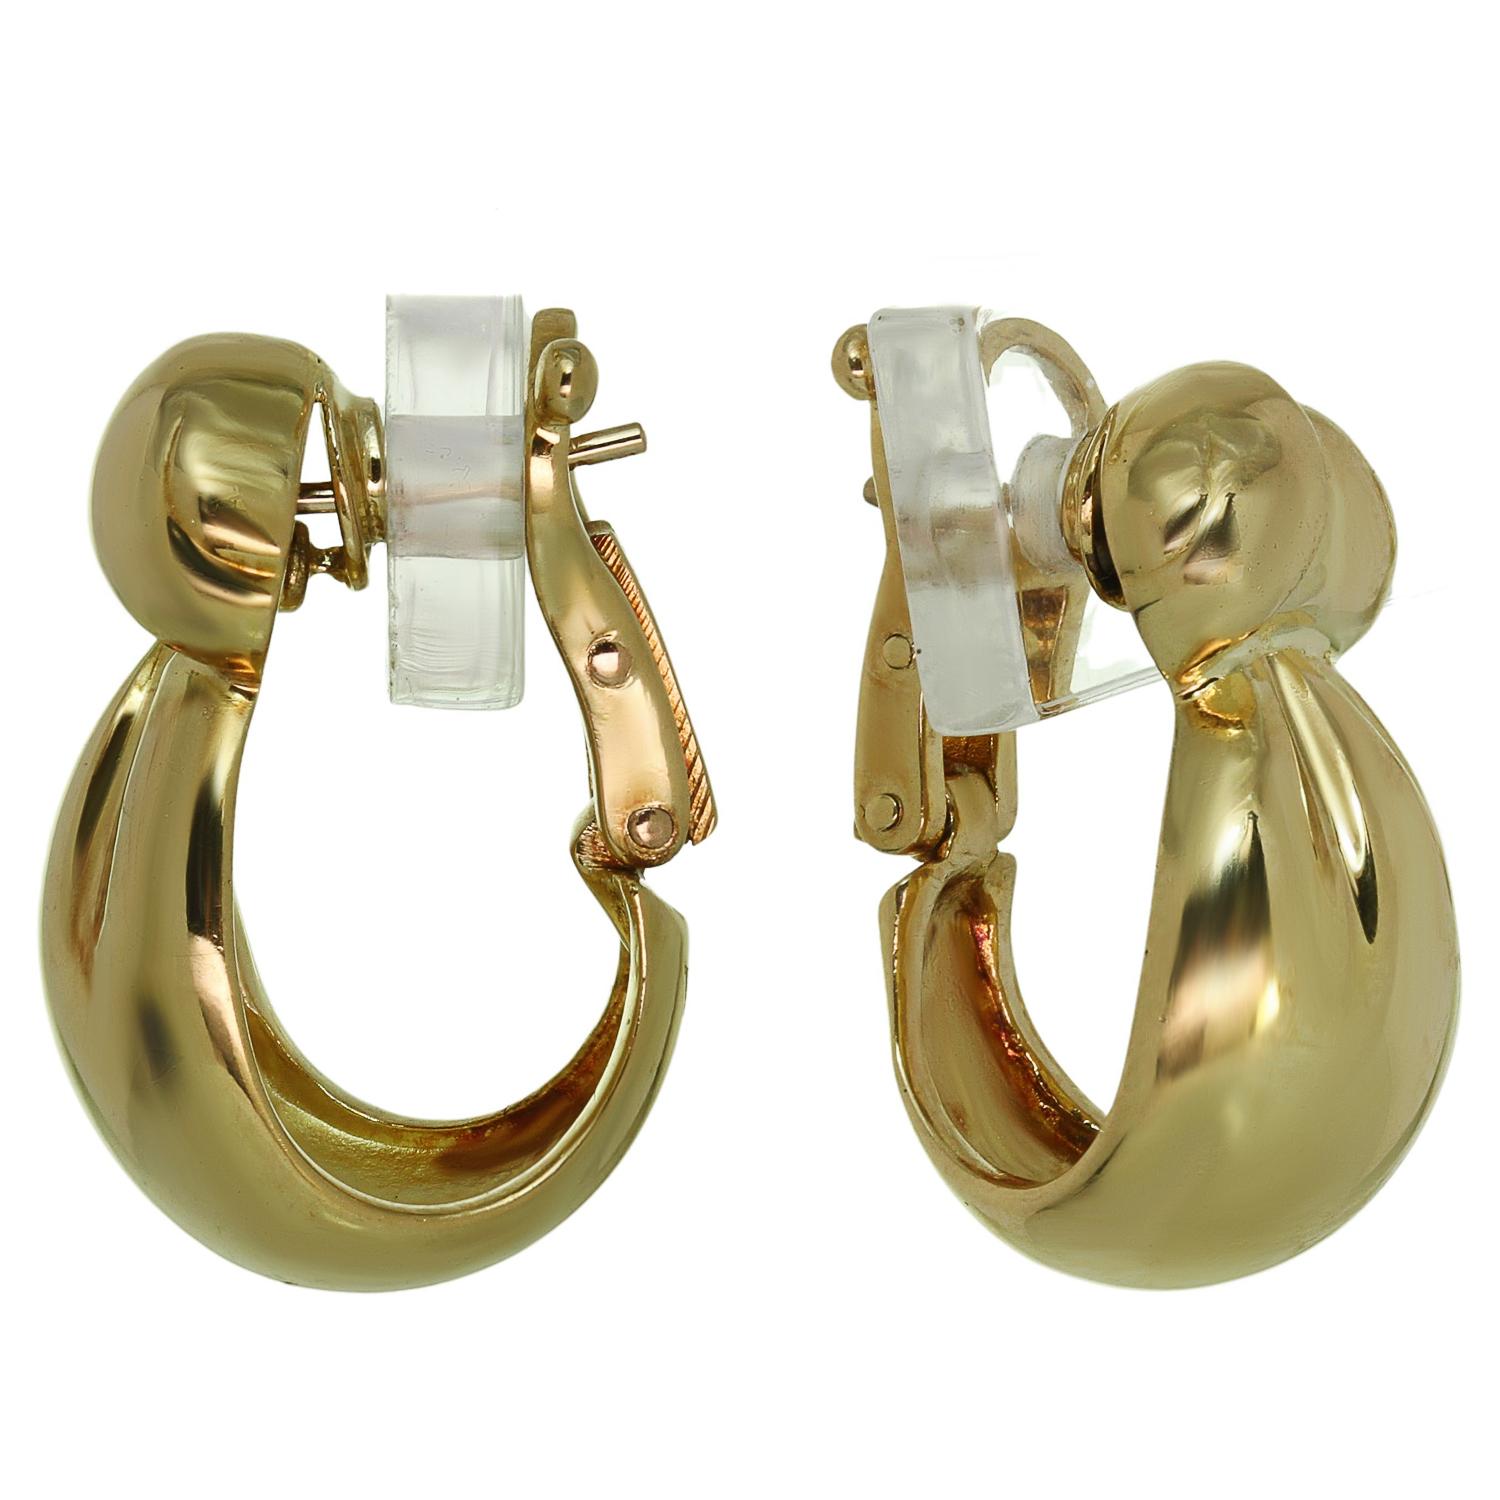 Van Cleef & Arpels 18k Yellow Gold Domed Earrings In Excellent Condition For Sale In New York, NY